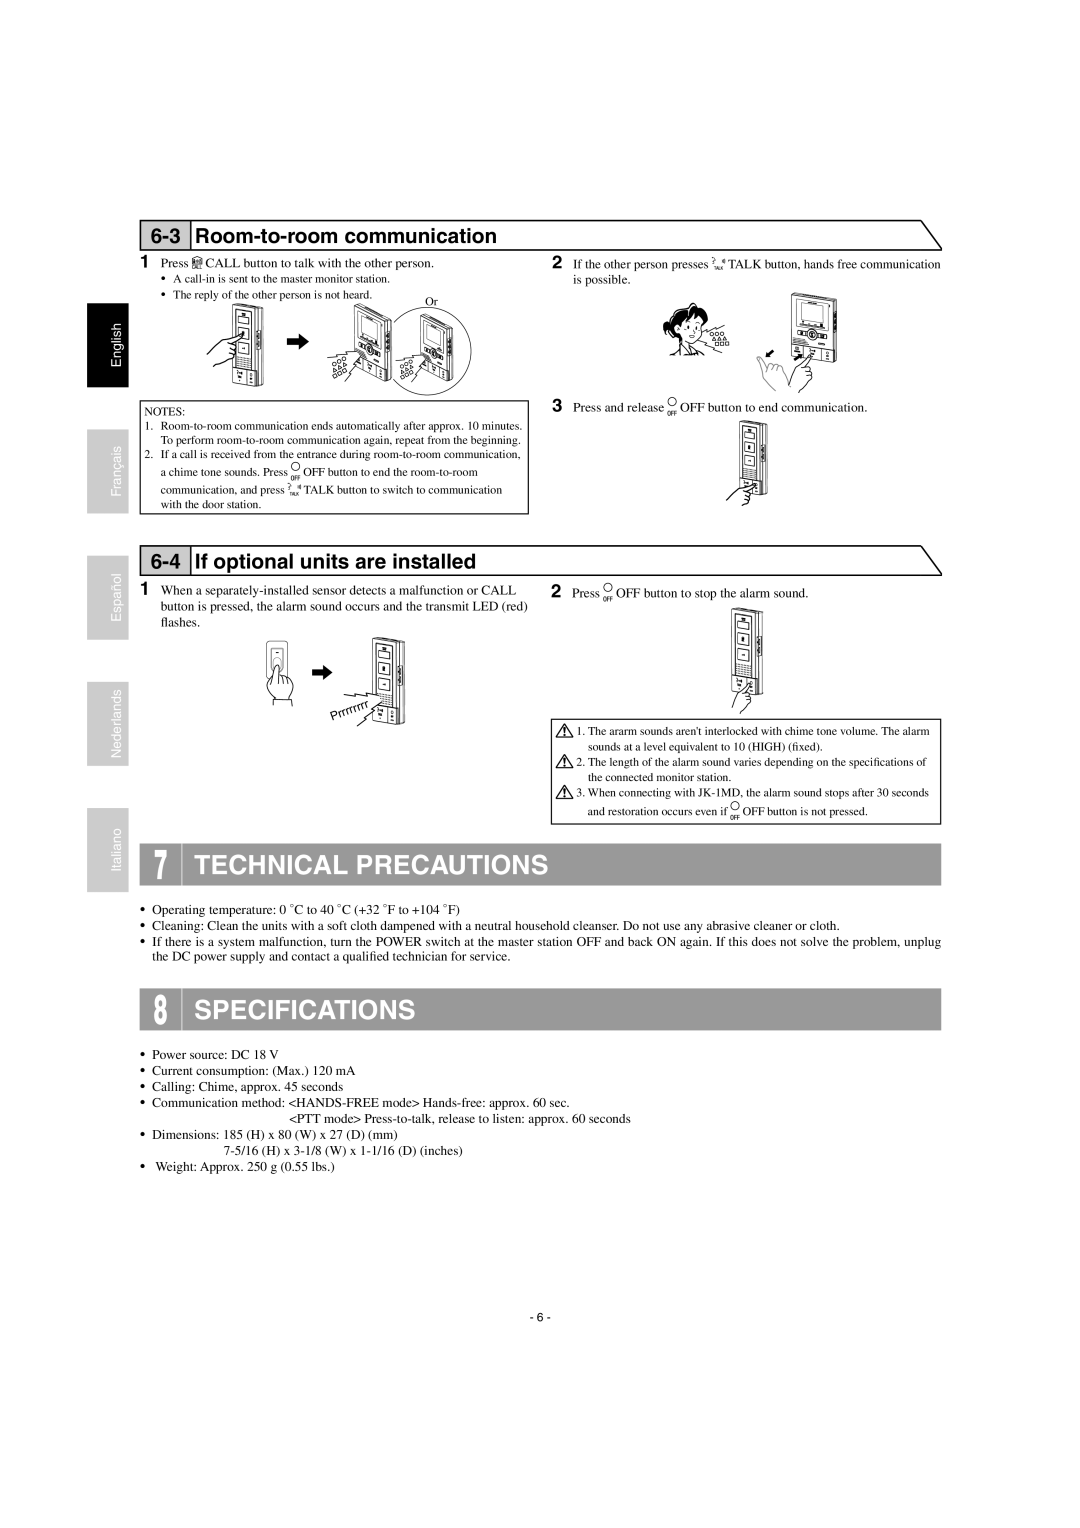 Aiphone JK-1SD Technical Precautions, Specifications, Room-to-roomcommunication, 6-4If optional units are installed 